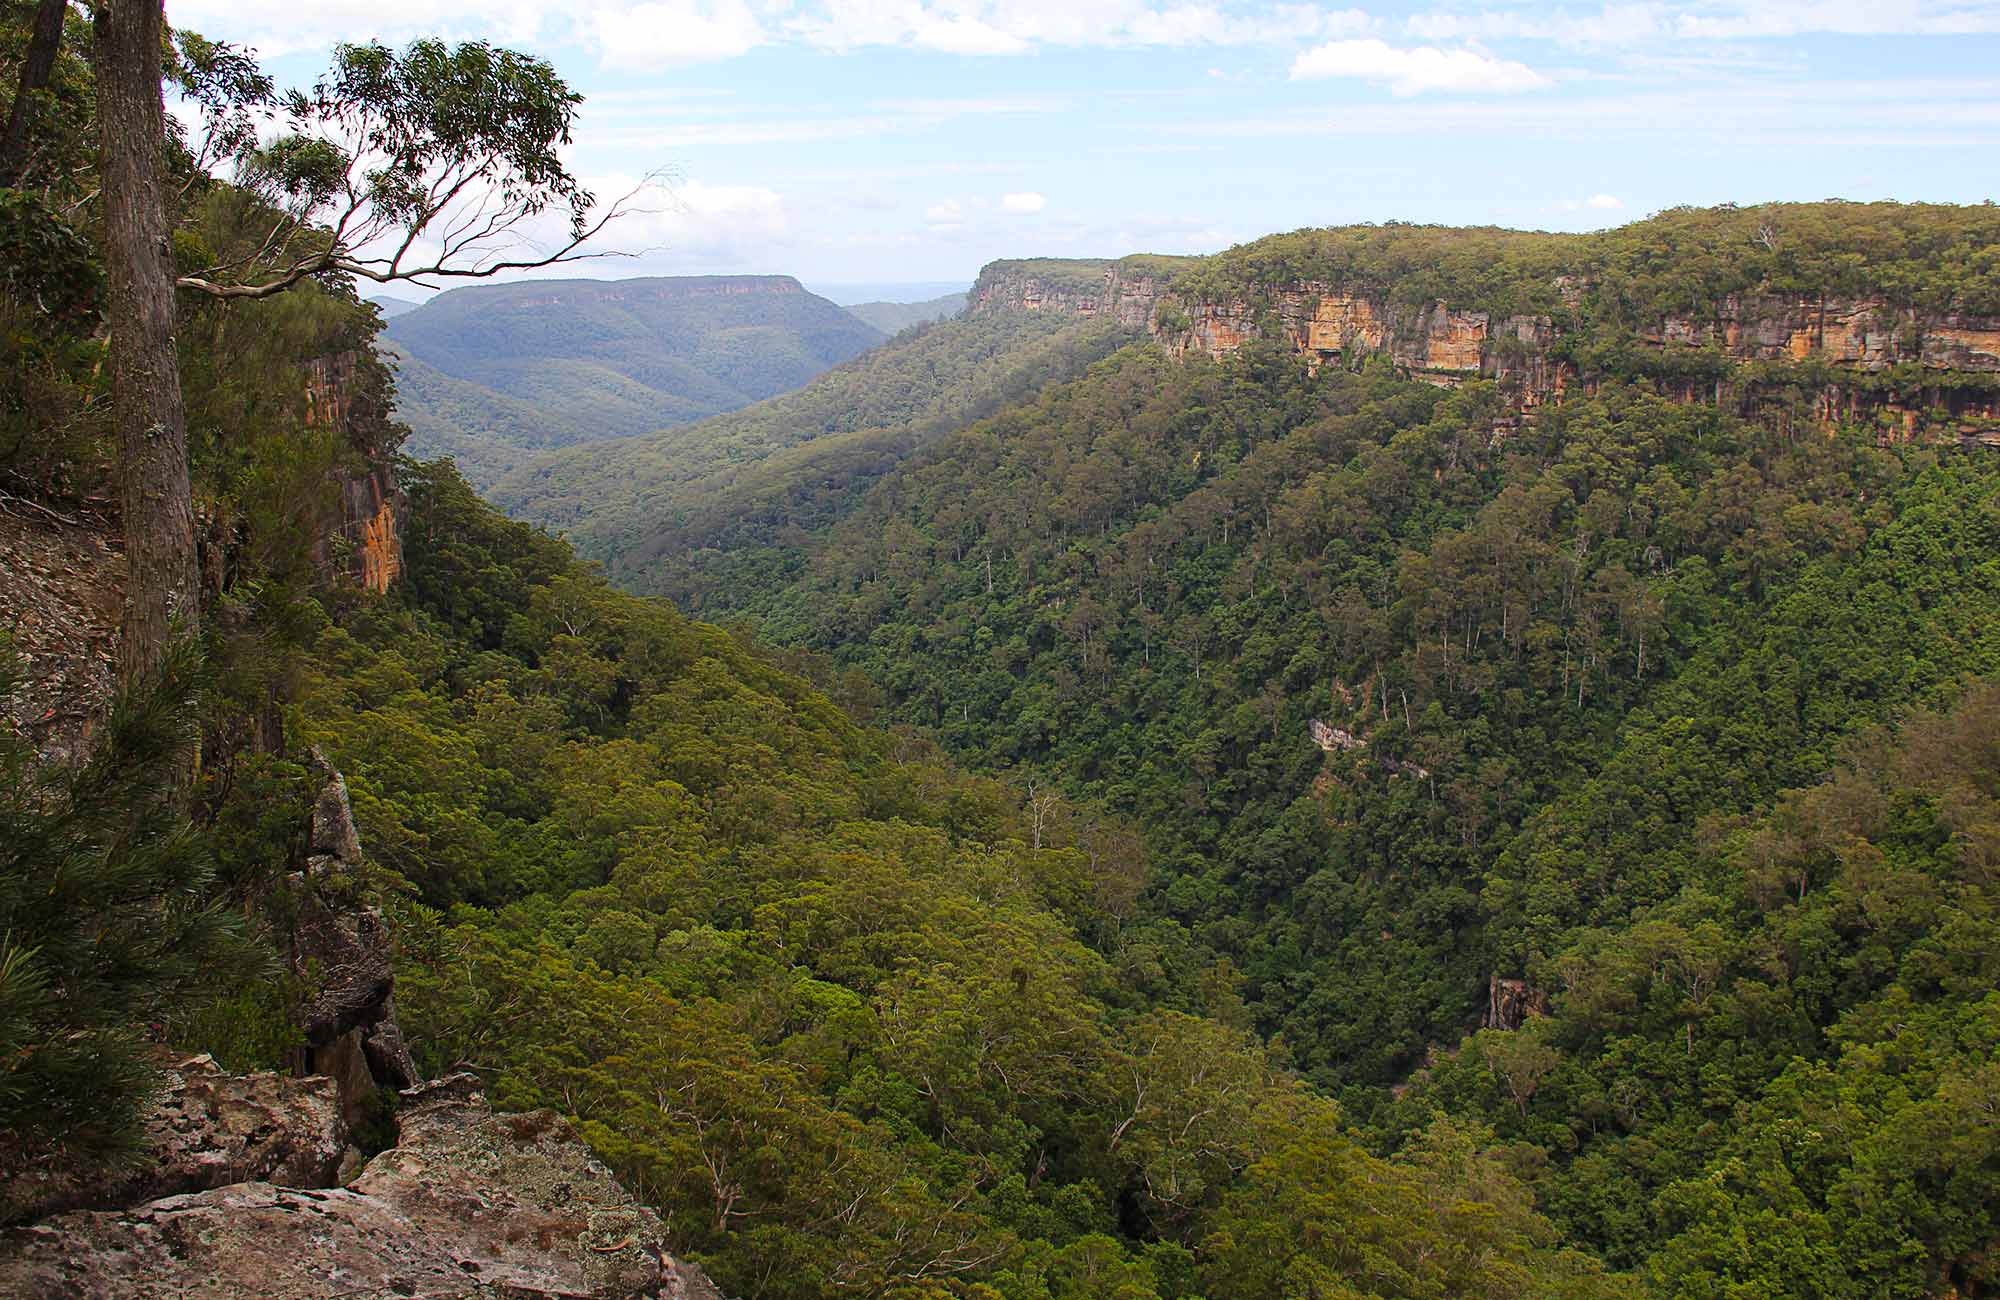 A view looking along the valley and rocky cliffs. Photo:John Yurasek